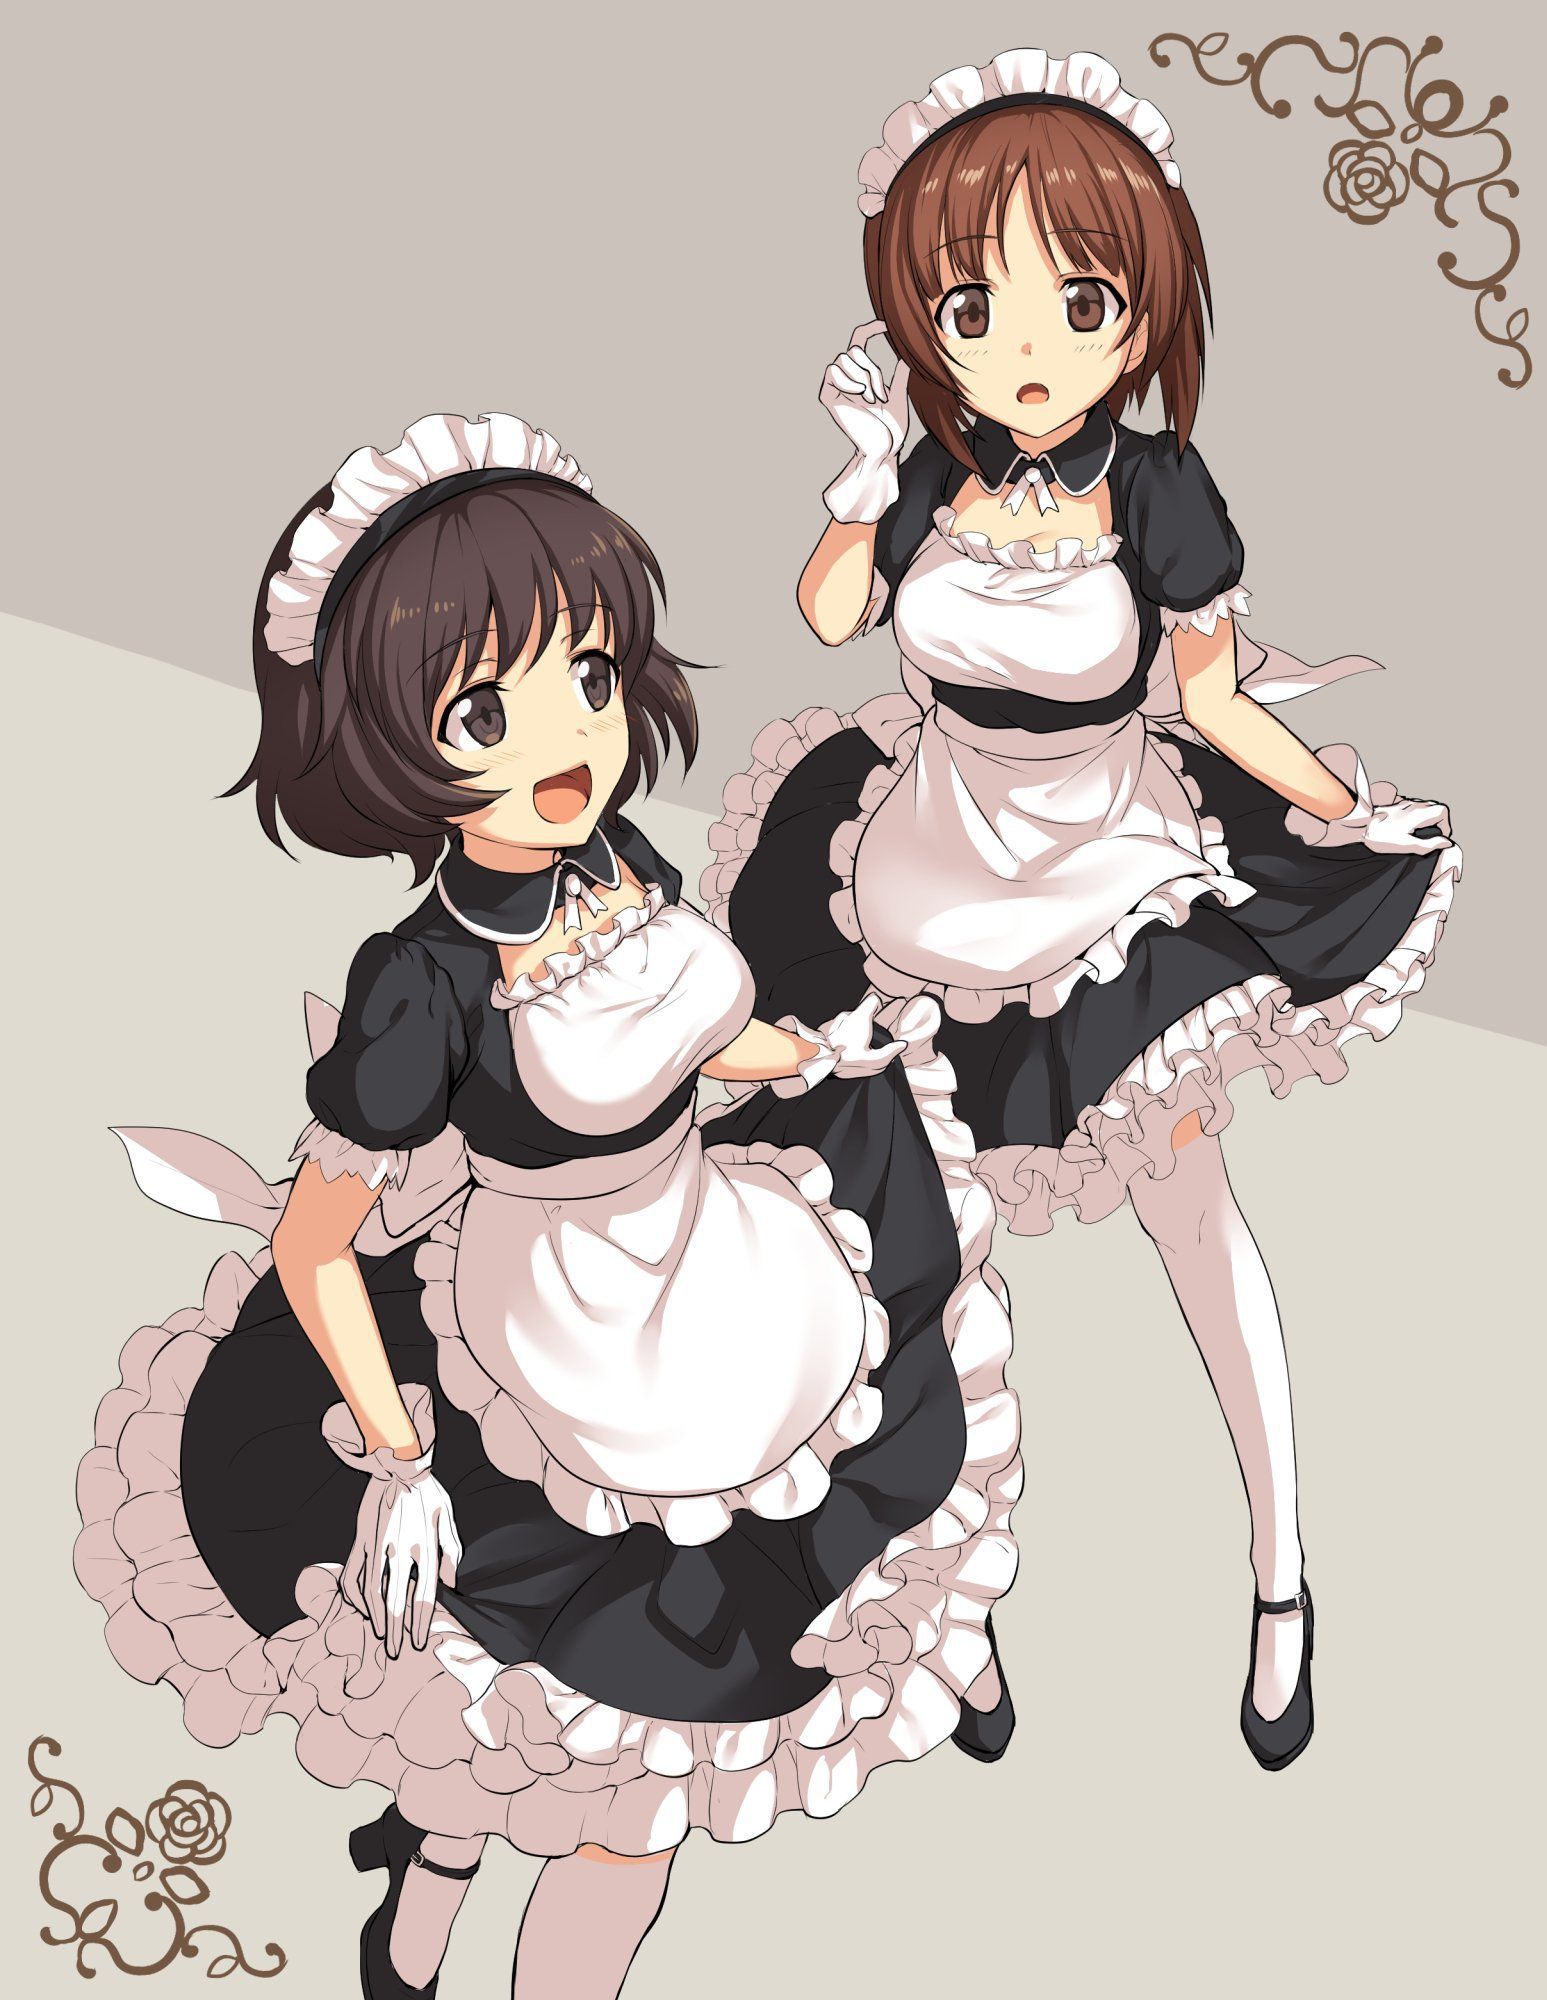 [Secondary erotic] image of a cute maid who seems to do things [44 sheets] 19